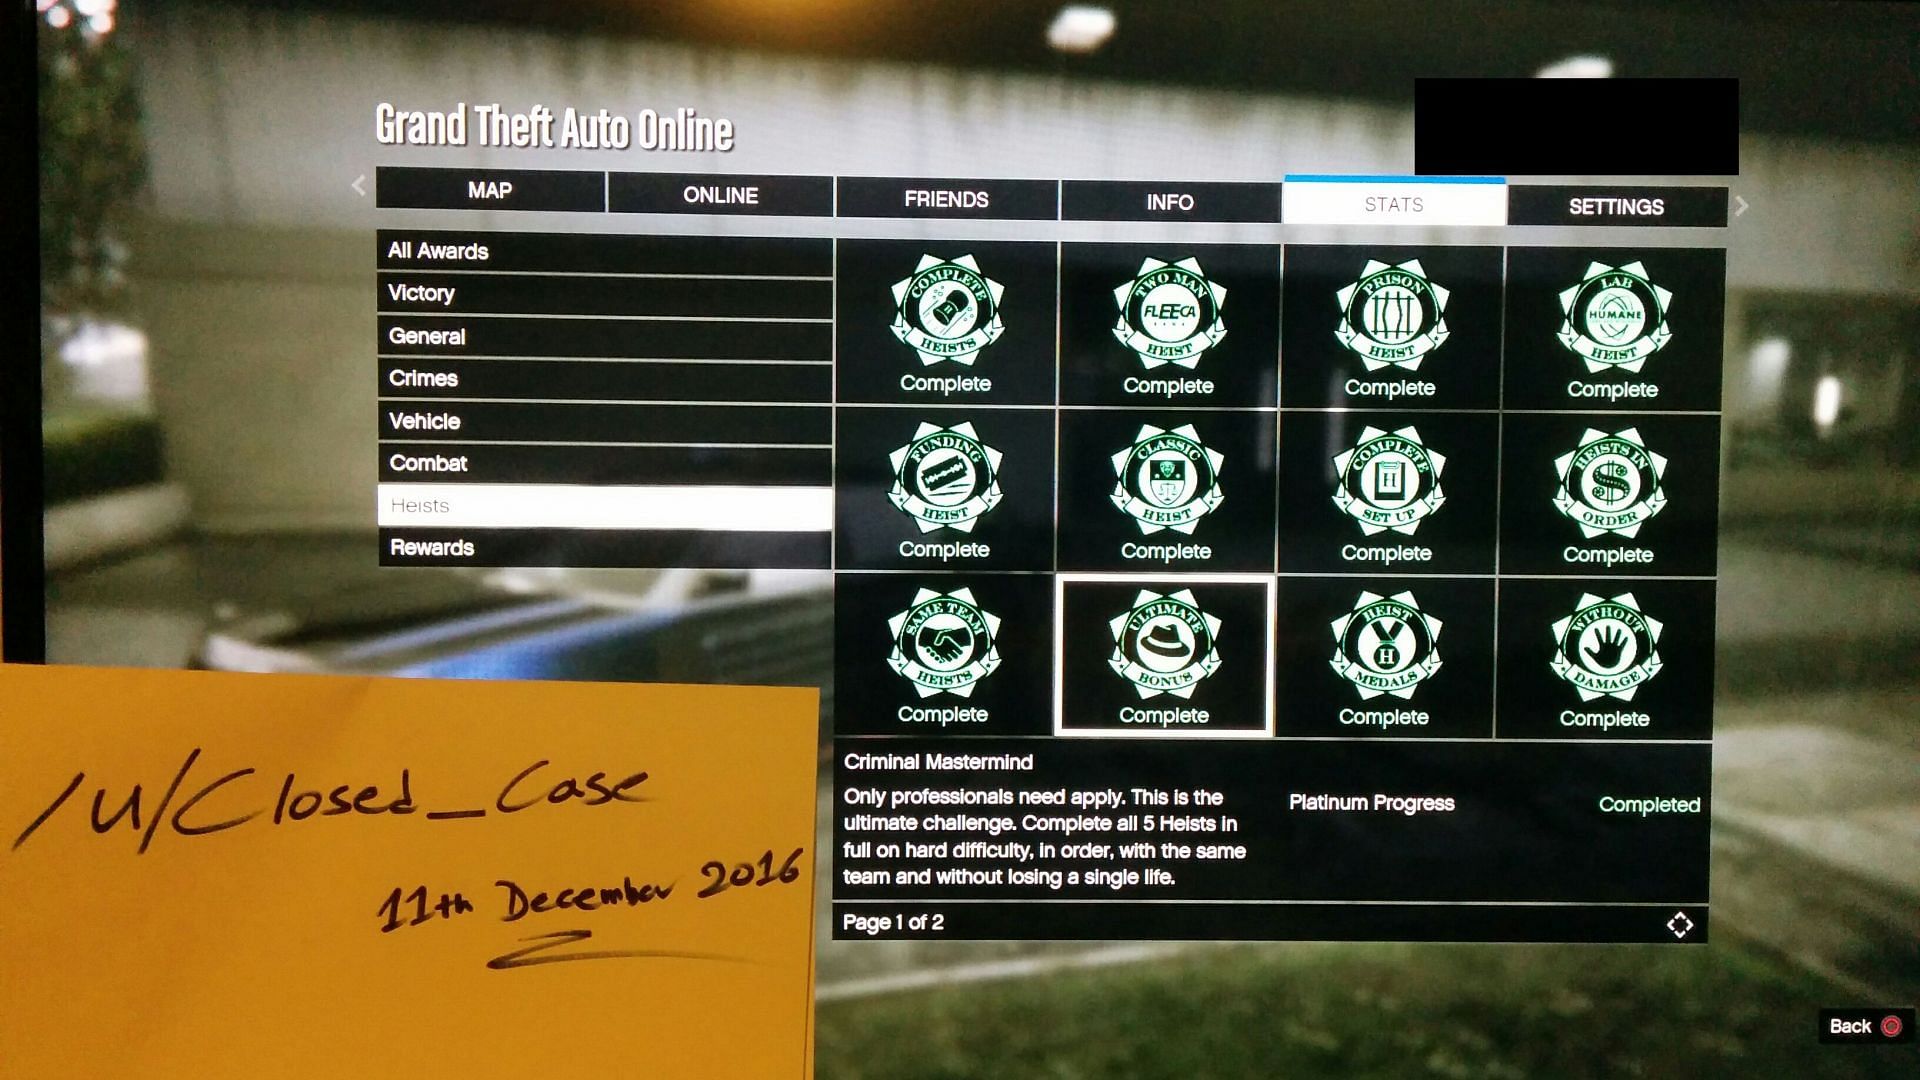 GTA Online&#039;s Criminal Mastermind award is one of the most elusive (Image via Reddit/Closed_Case)